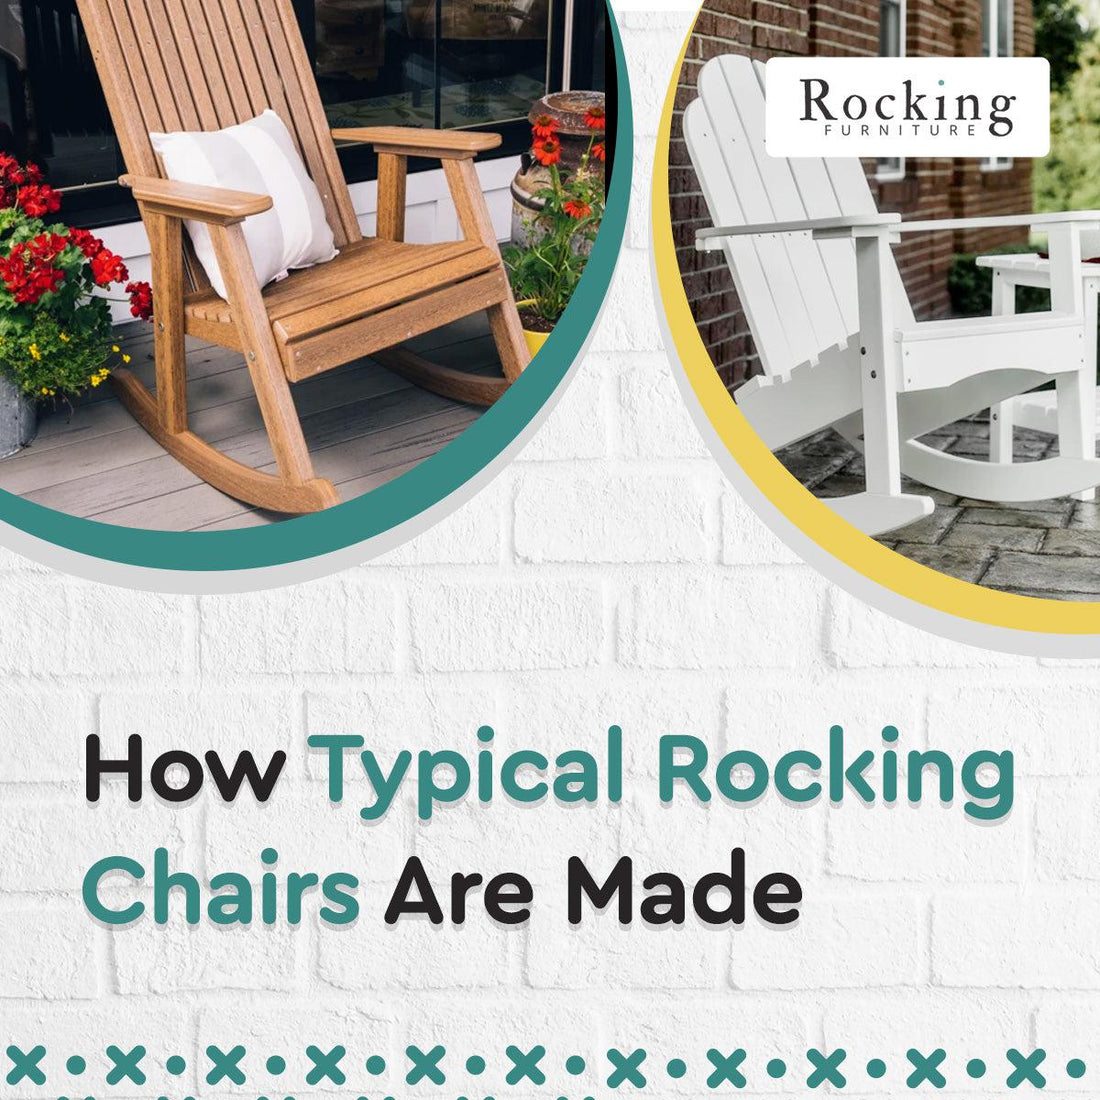 How Typical Rocking Chairs Are Made